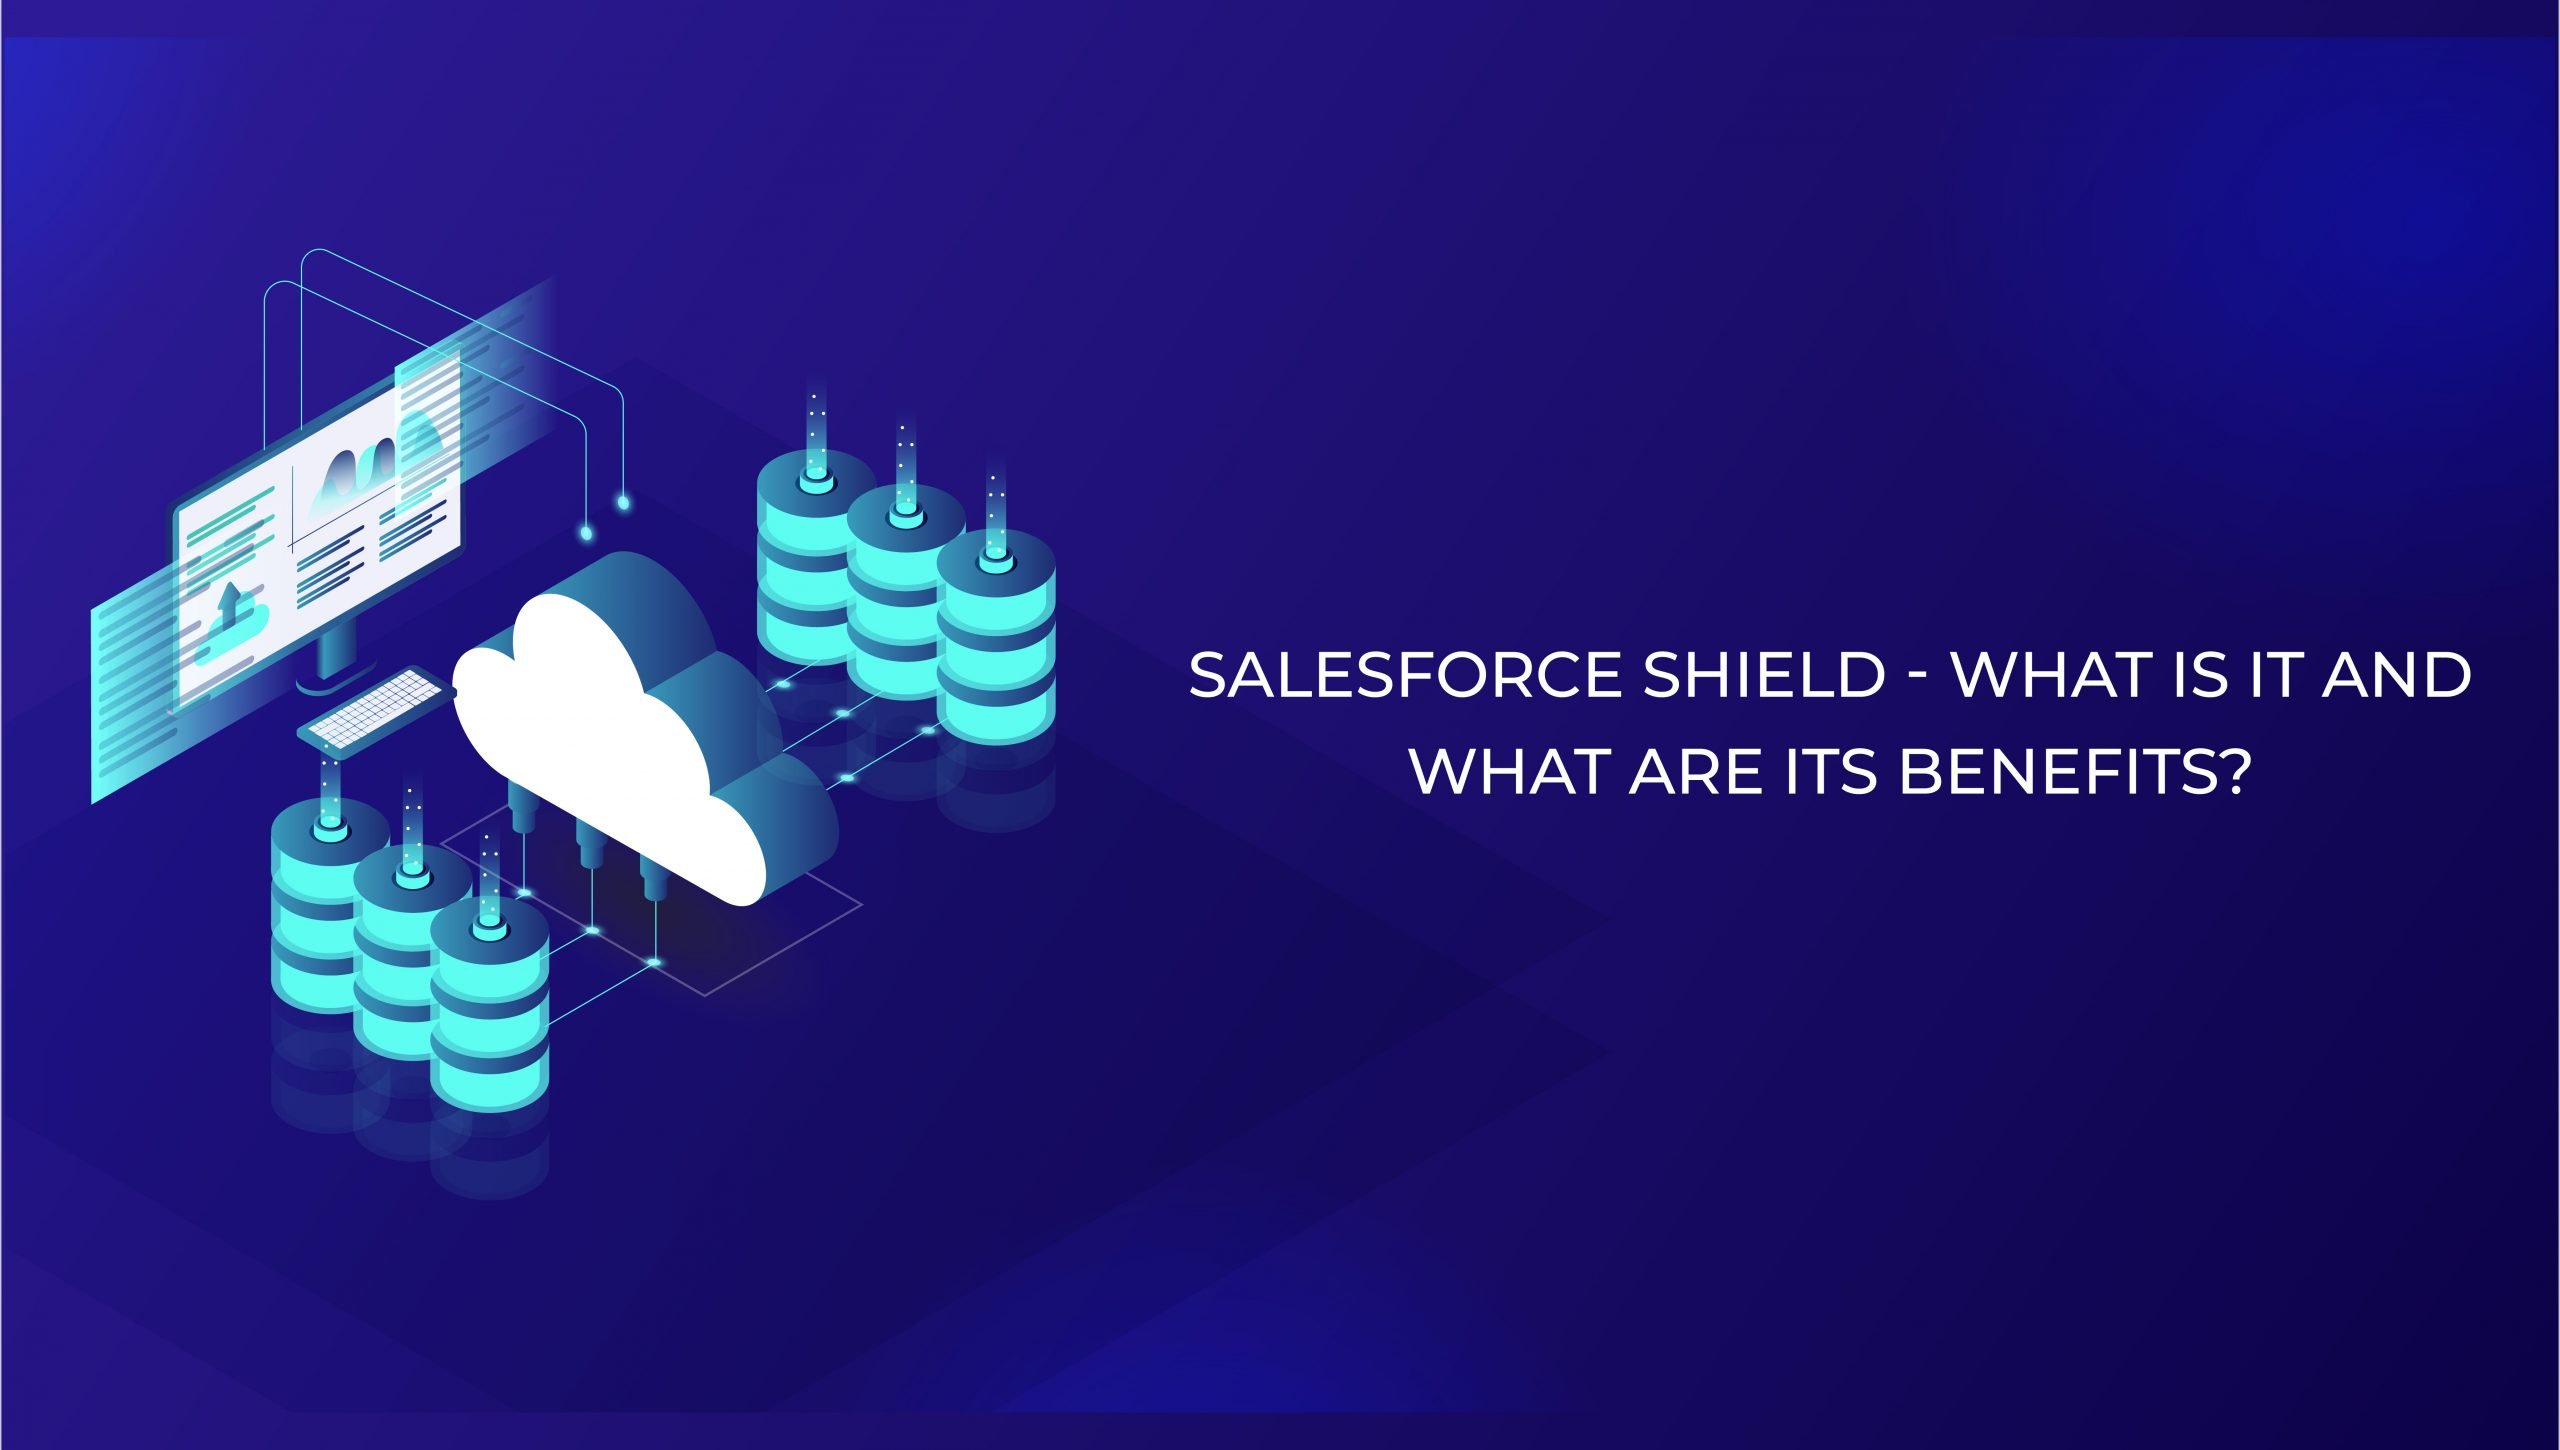 Salesforce shield - what is it and what are its benefits